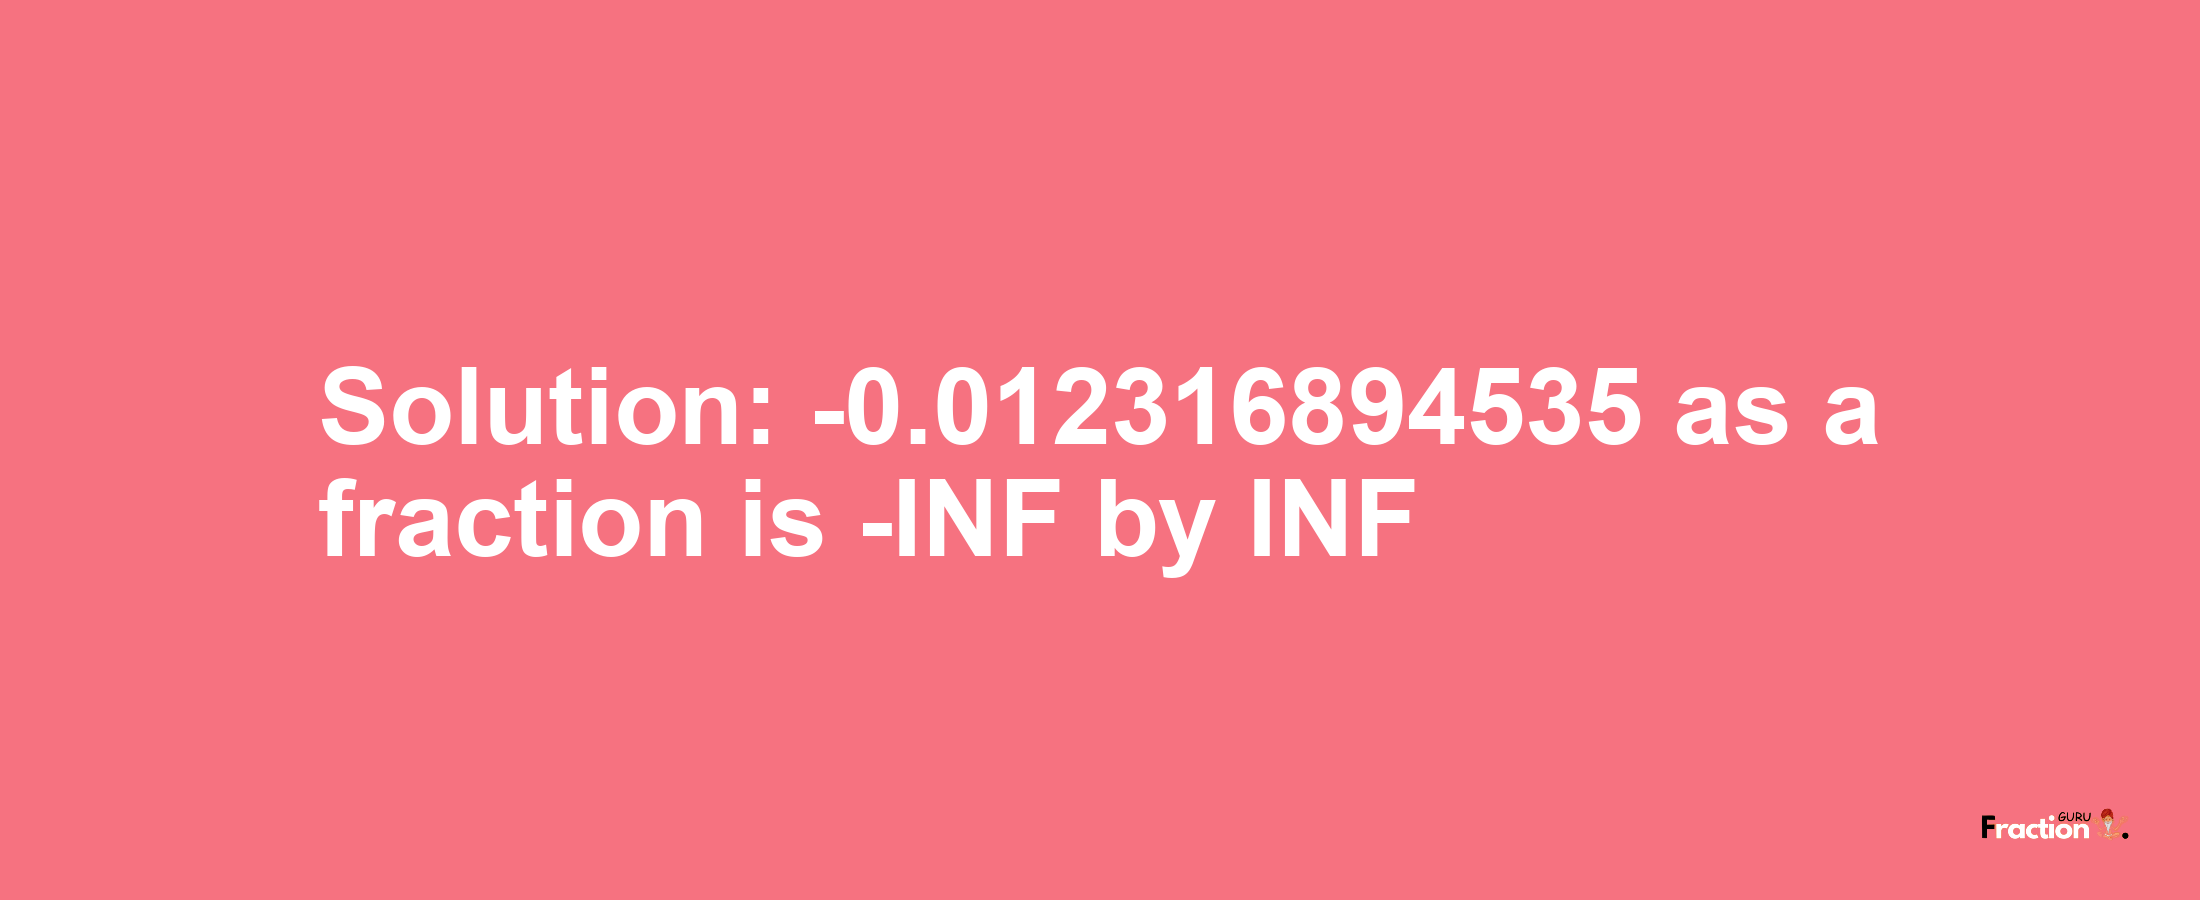 Solution:-0.012316894535 as a fraction is -INF/INF